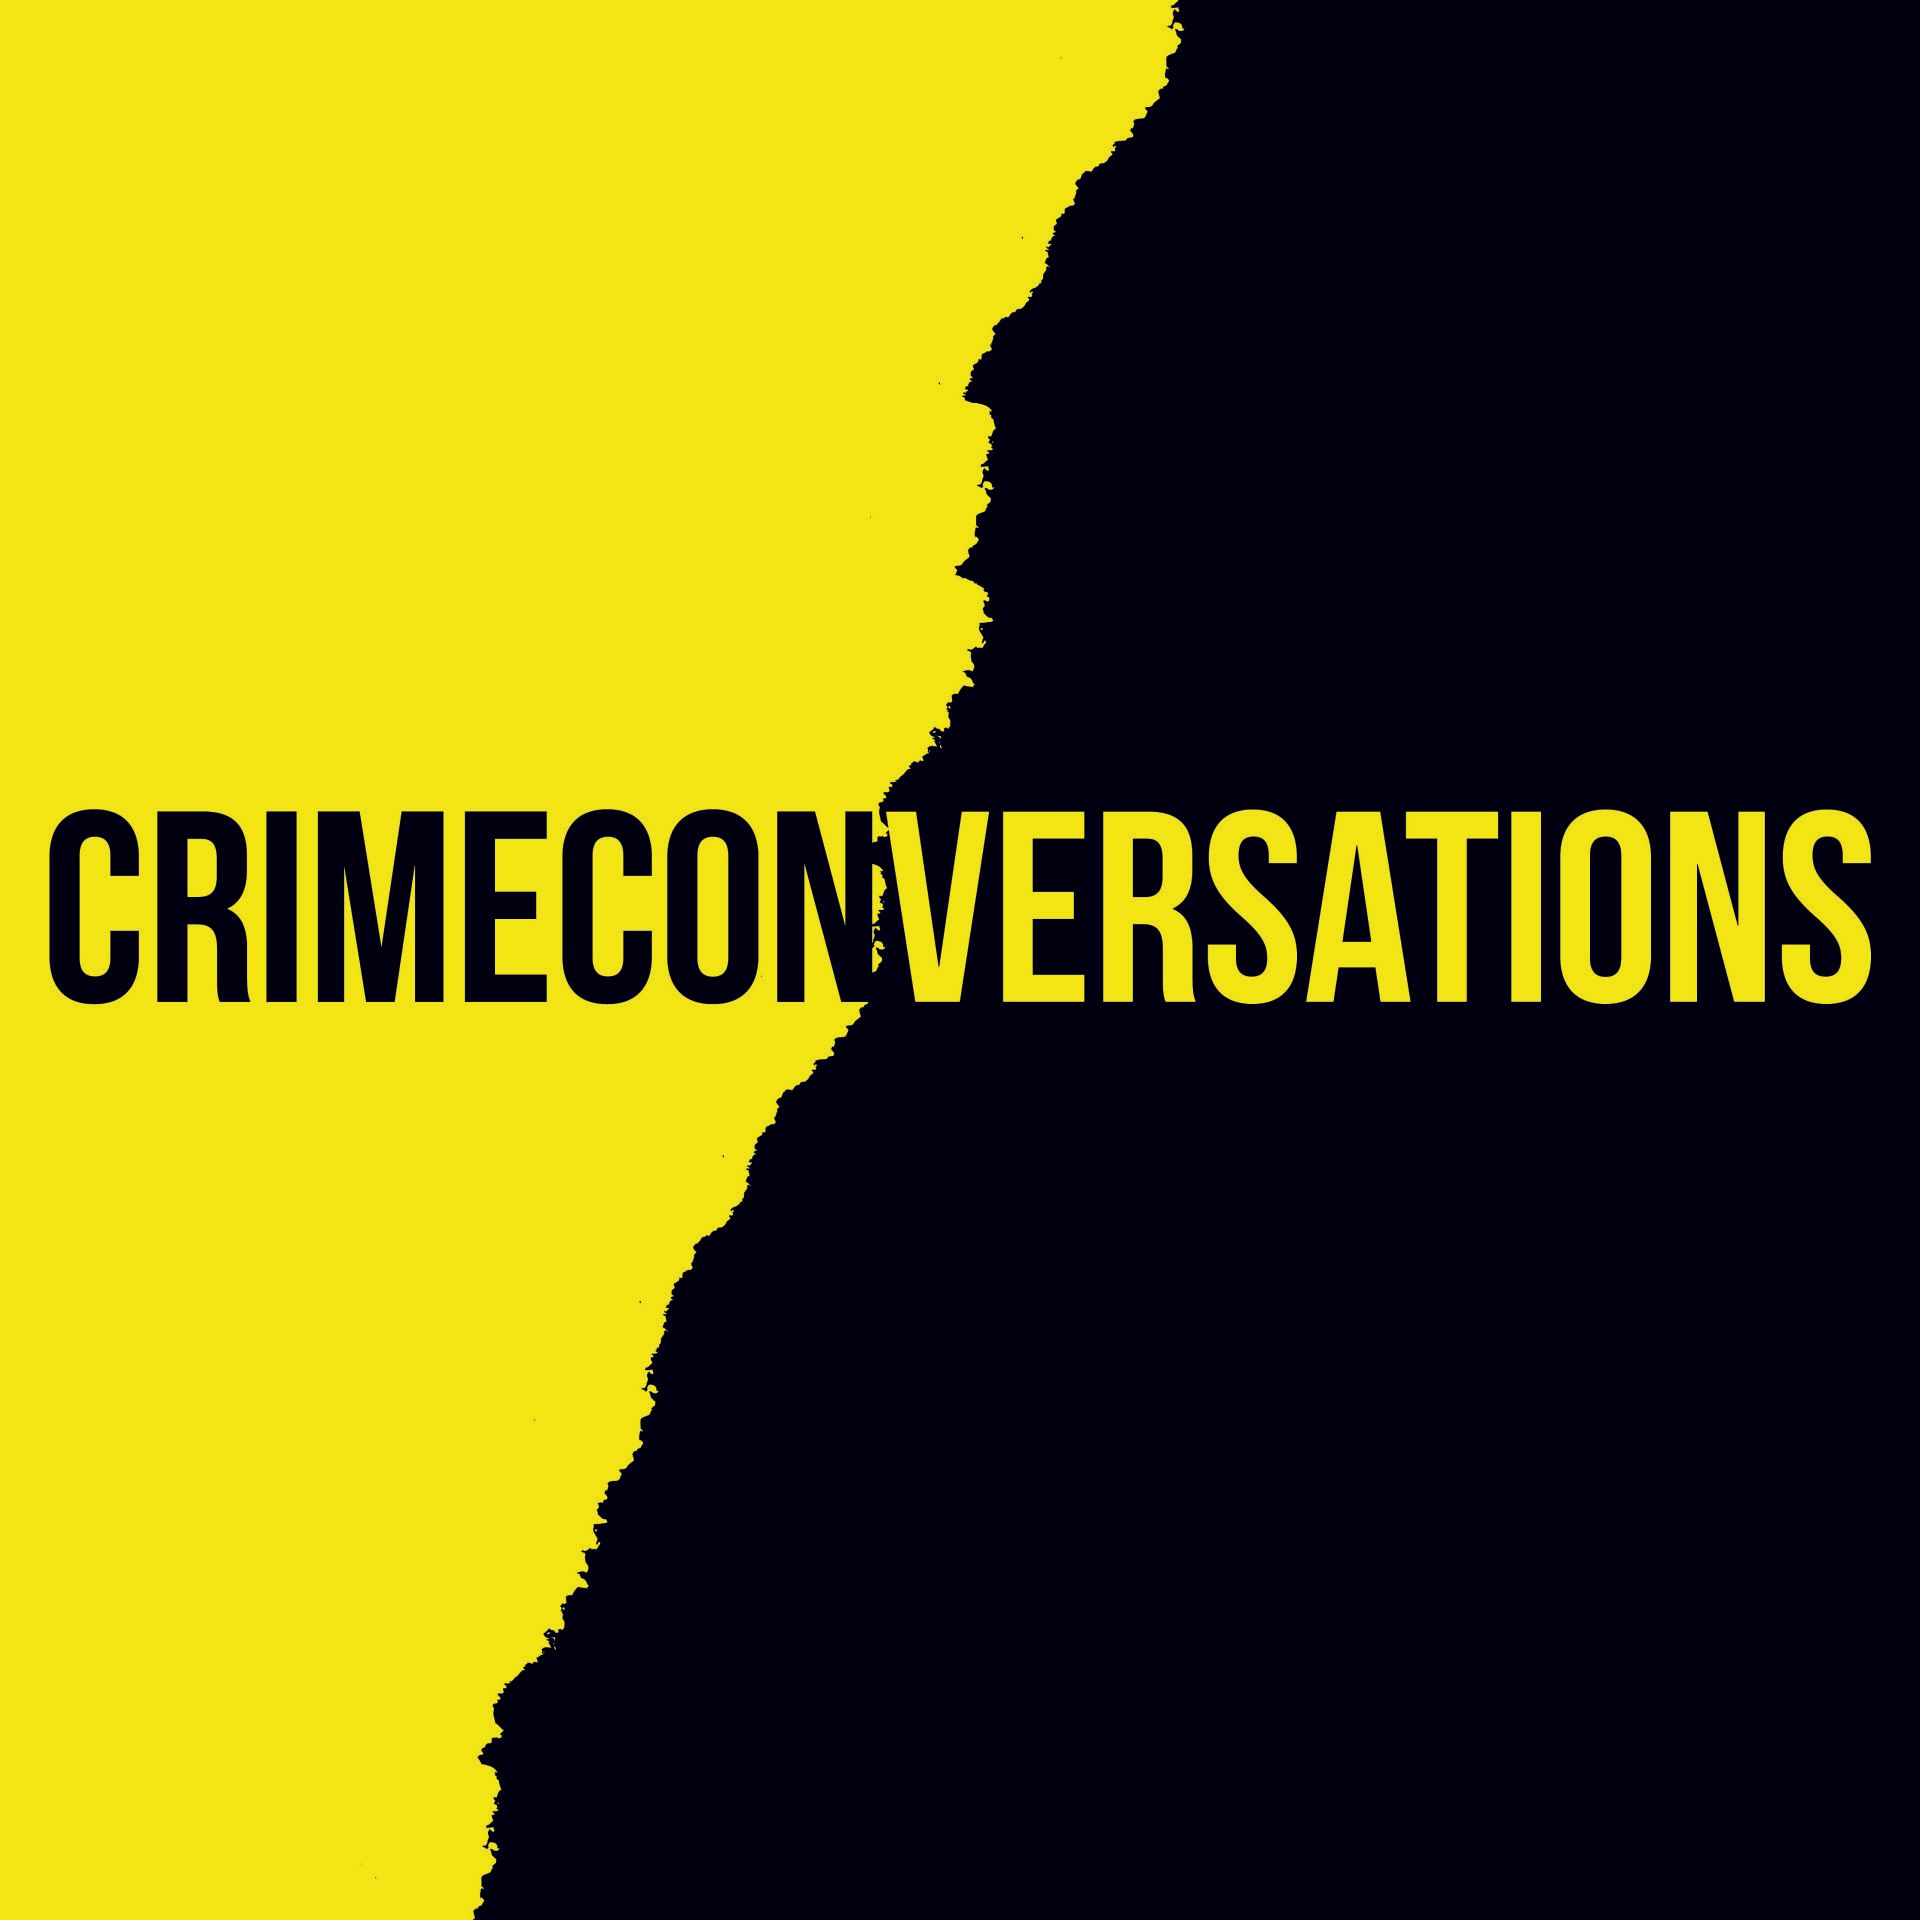 CrimeConversations the new podcast bought to you by CrimeCon UK